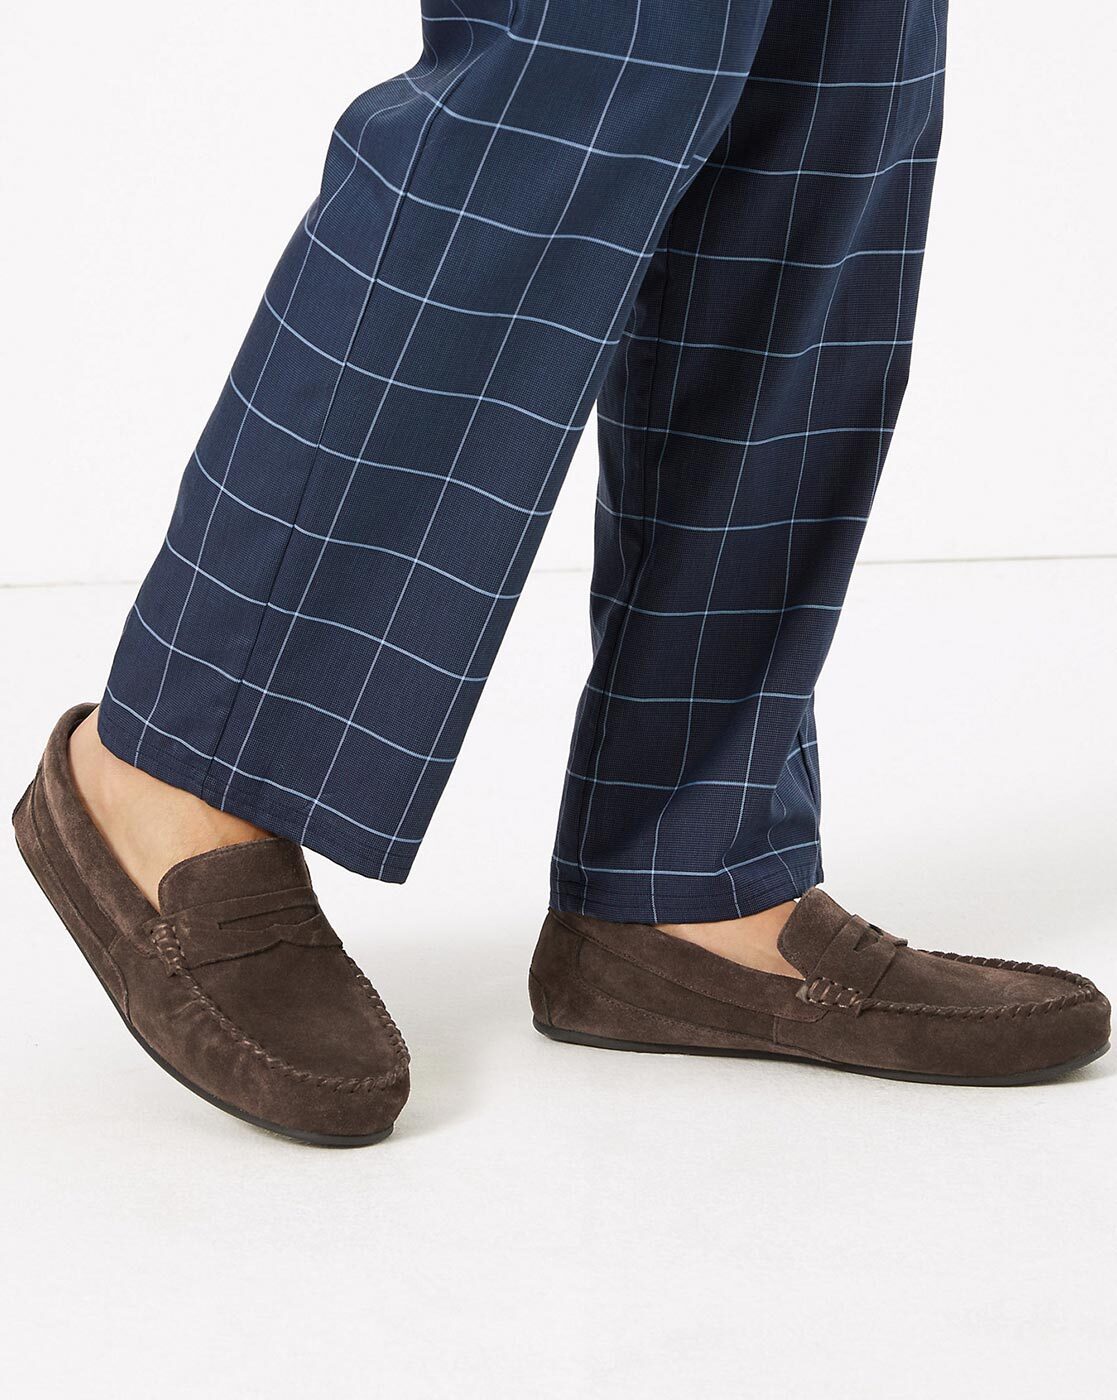 marks and spencer mens boat shoes